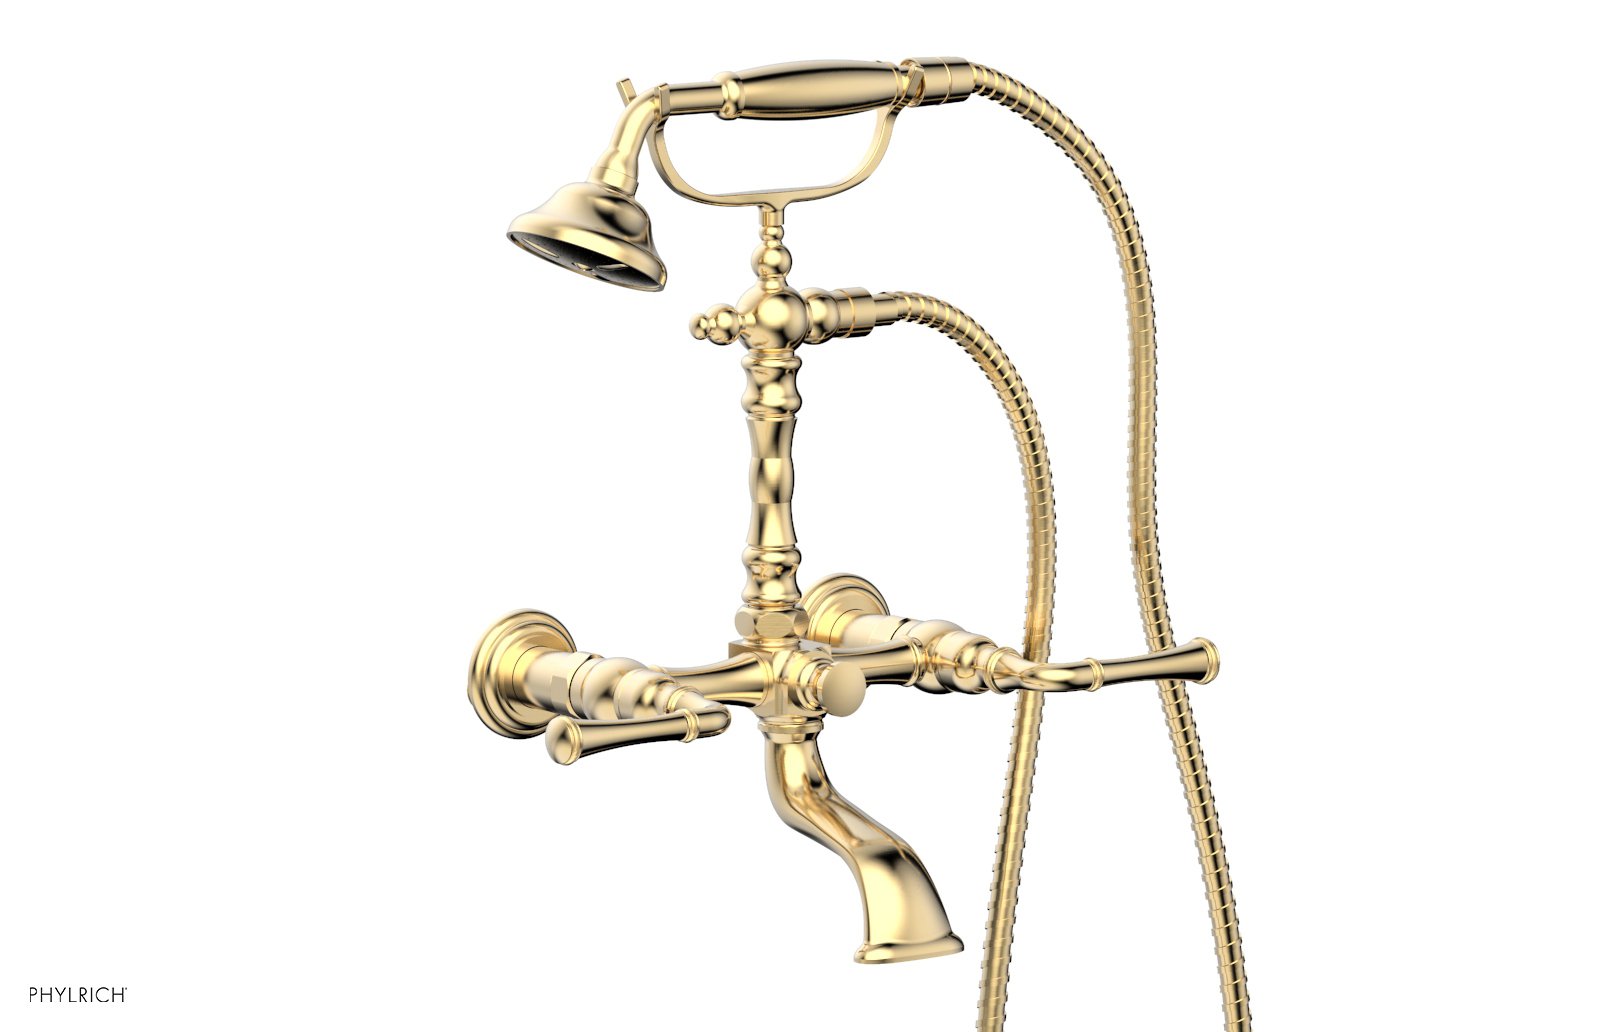 Phylrich COINED Exposed Tub & Hand Shower - Lever Handle